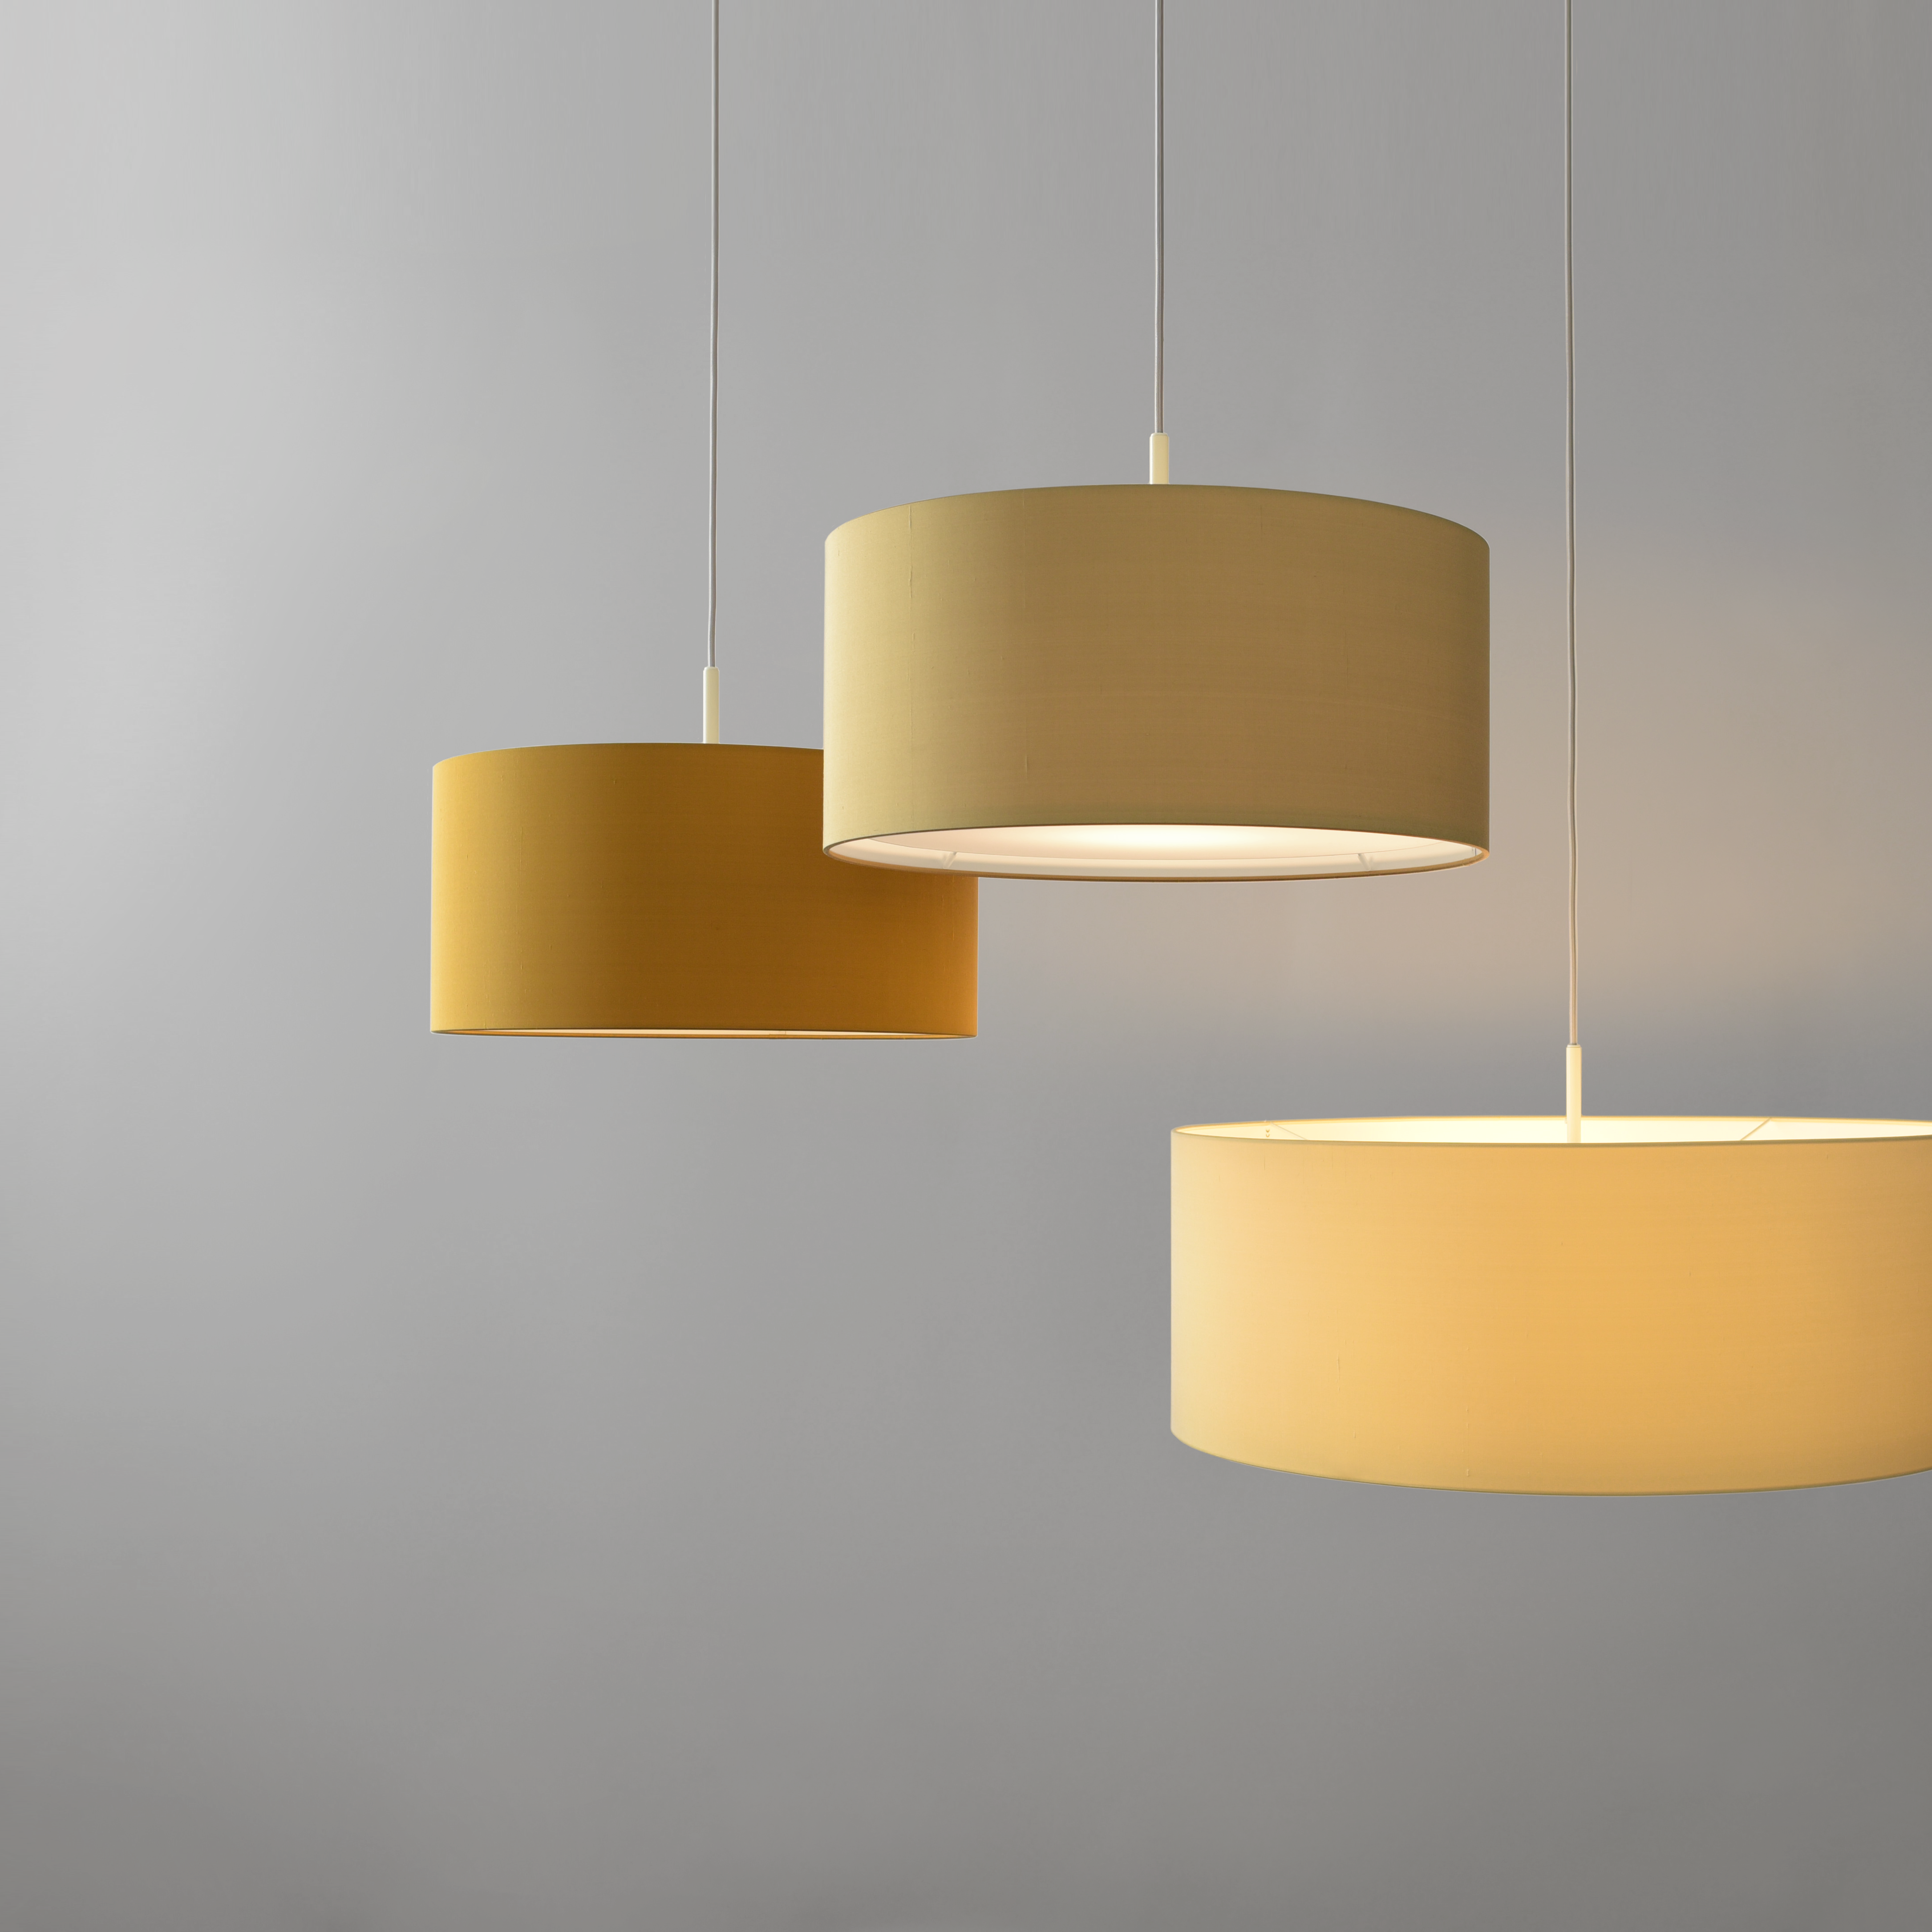 Set of CYLS DRUM pendant lights in dupion silks: champagne, ochre and almond